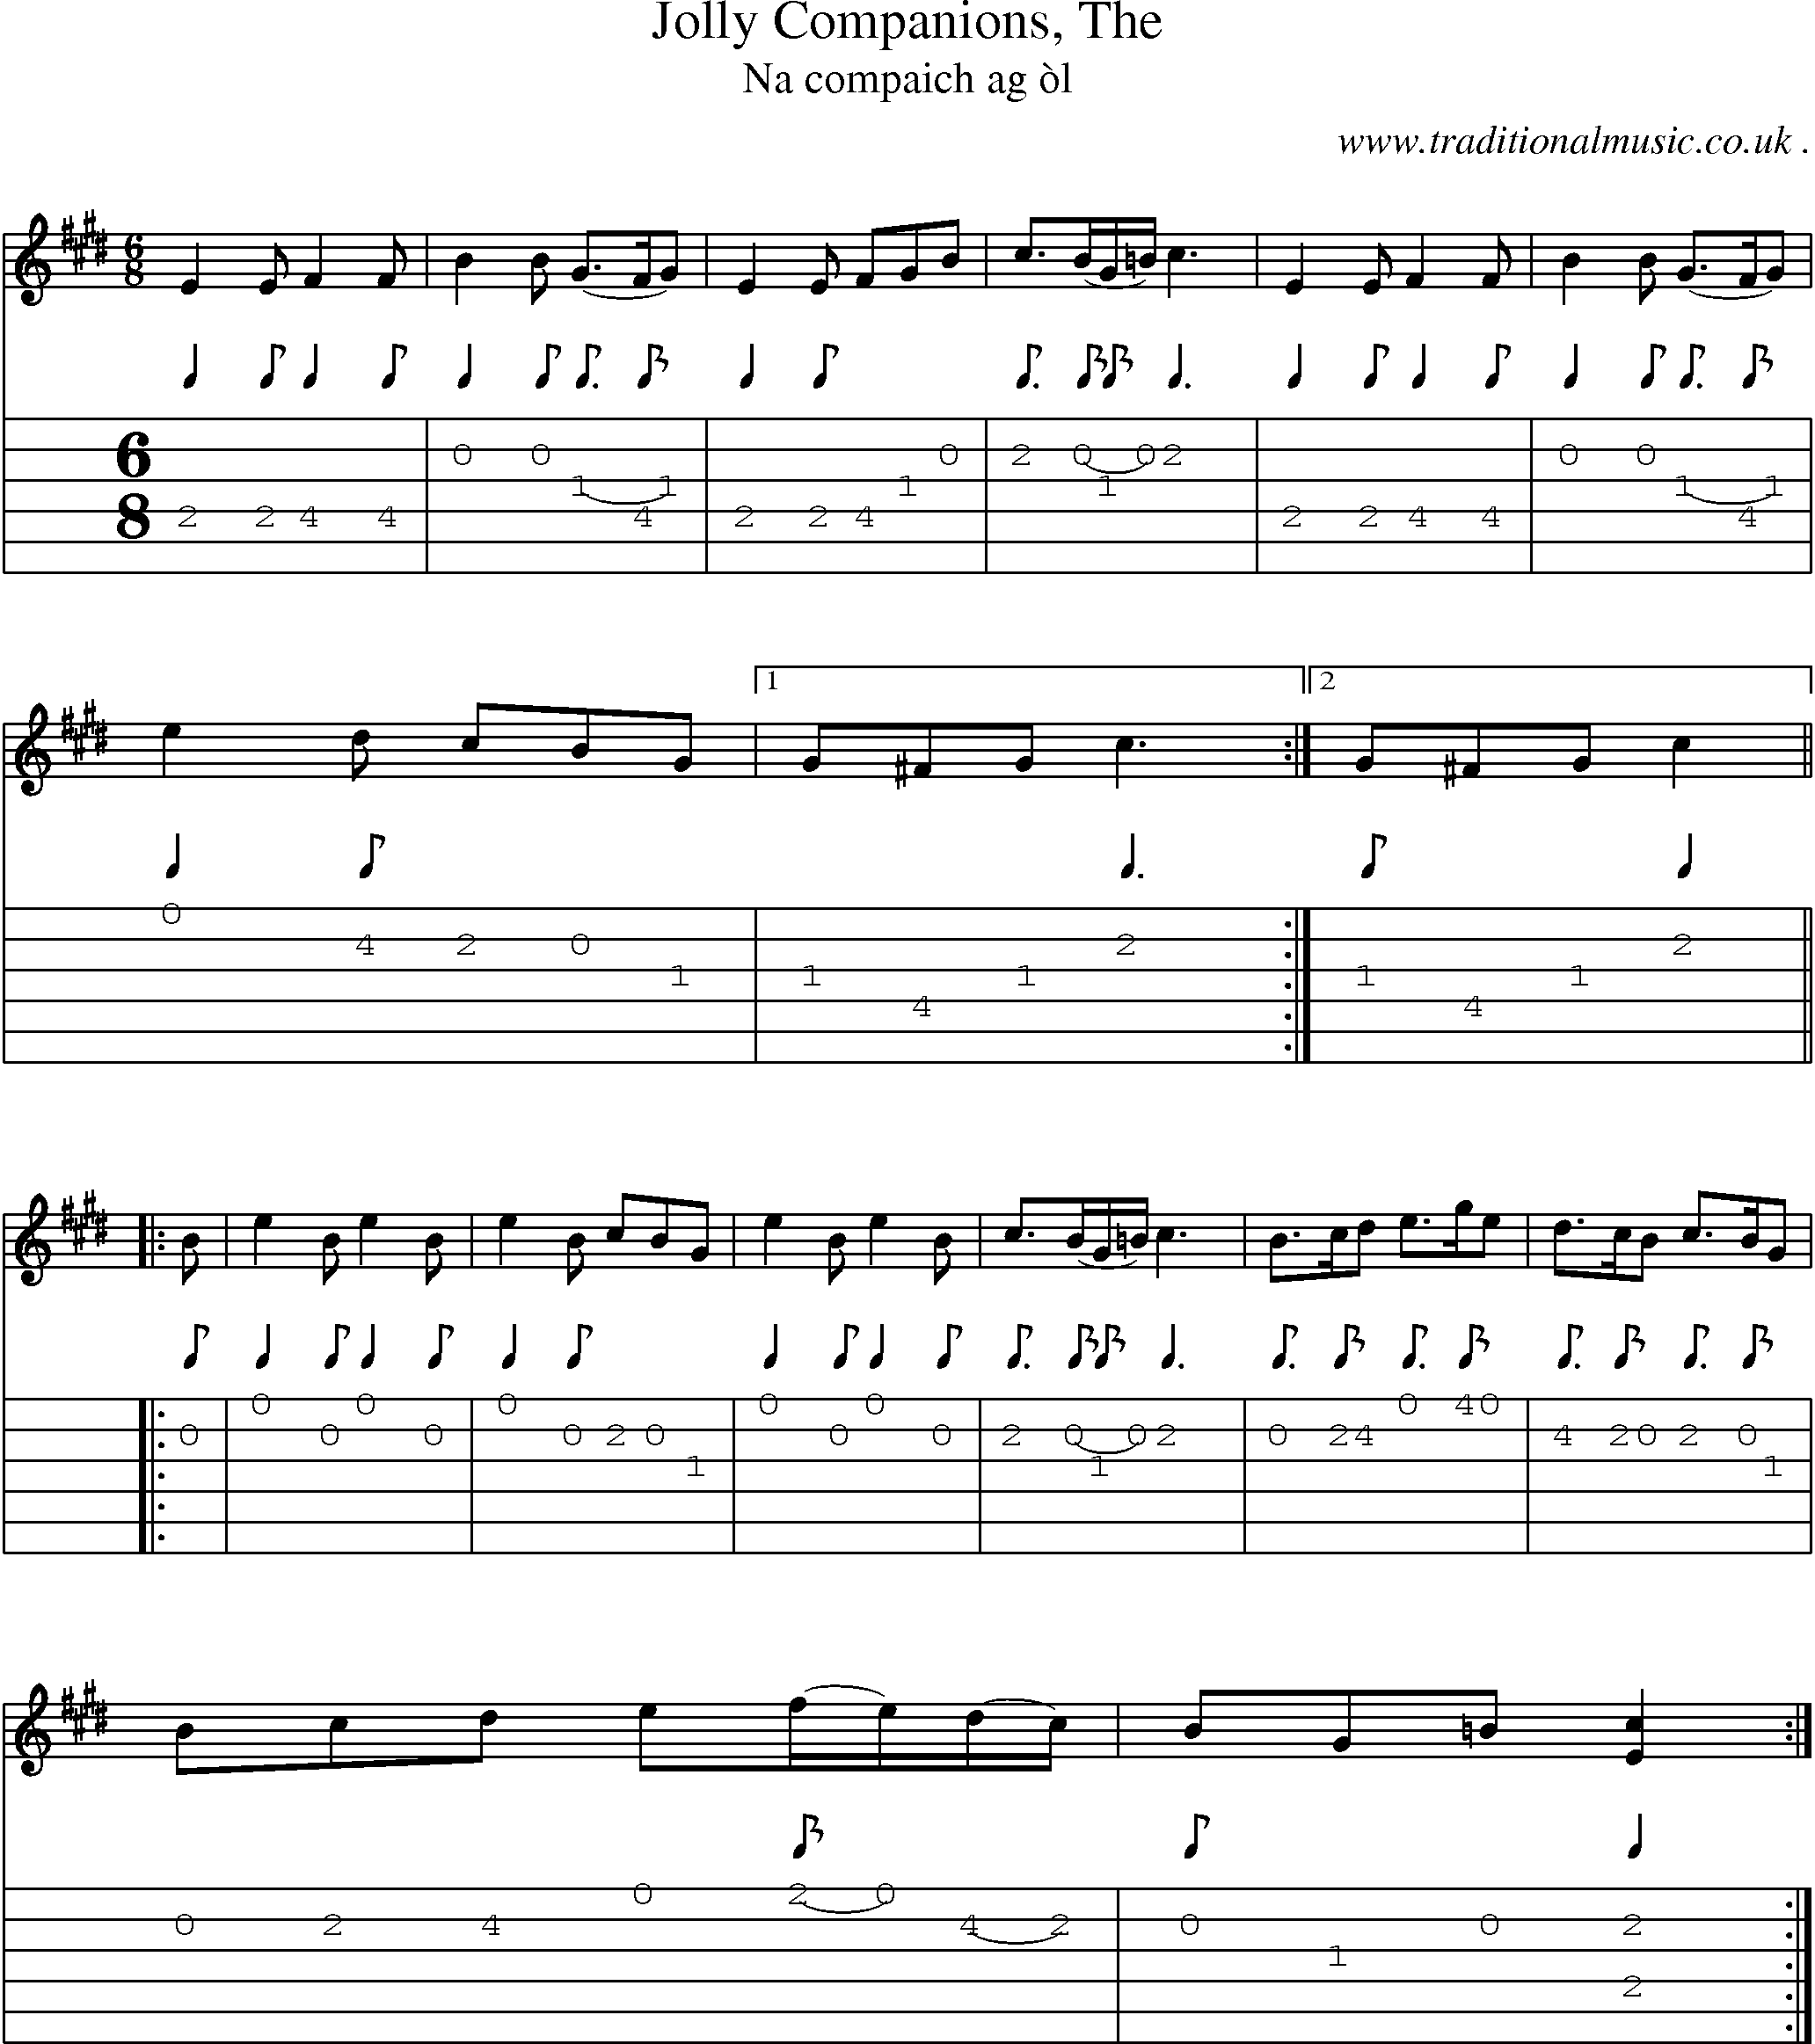 Sheet-music  score, Chords and Guitar Tabs for Jolly Companions The